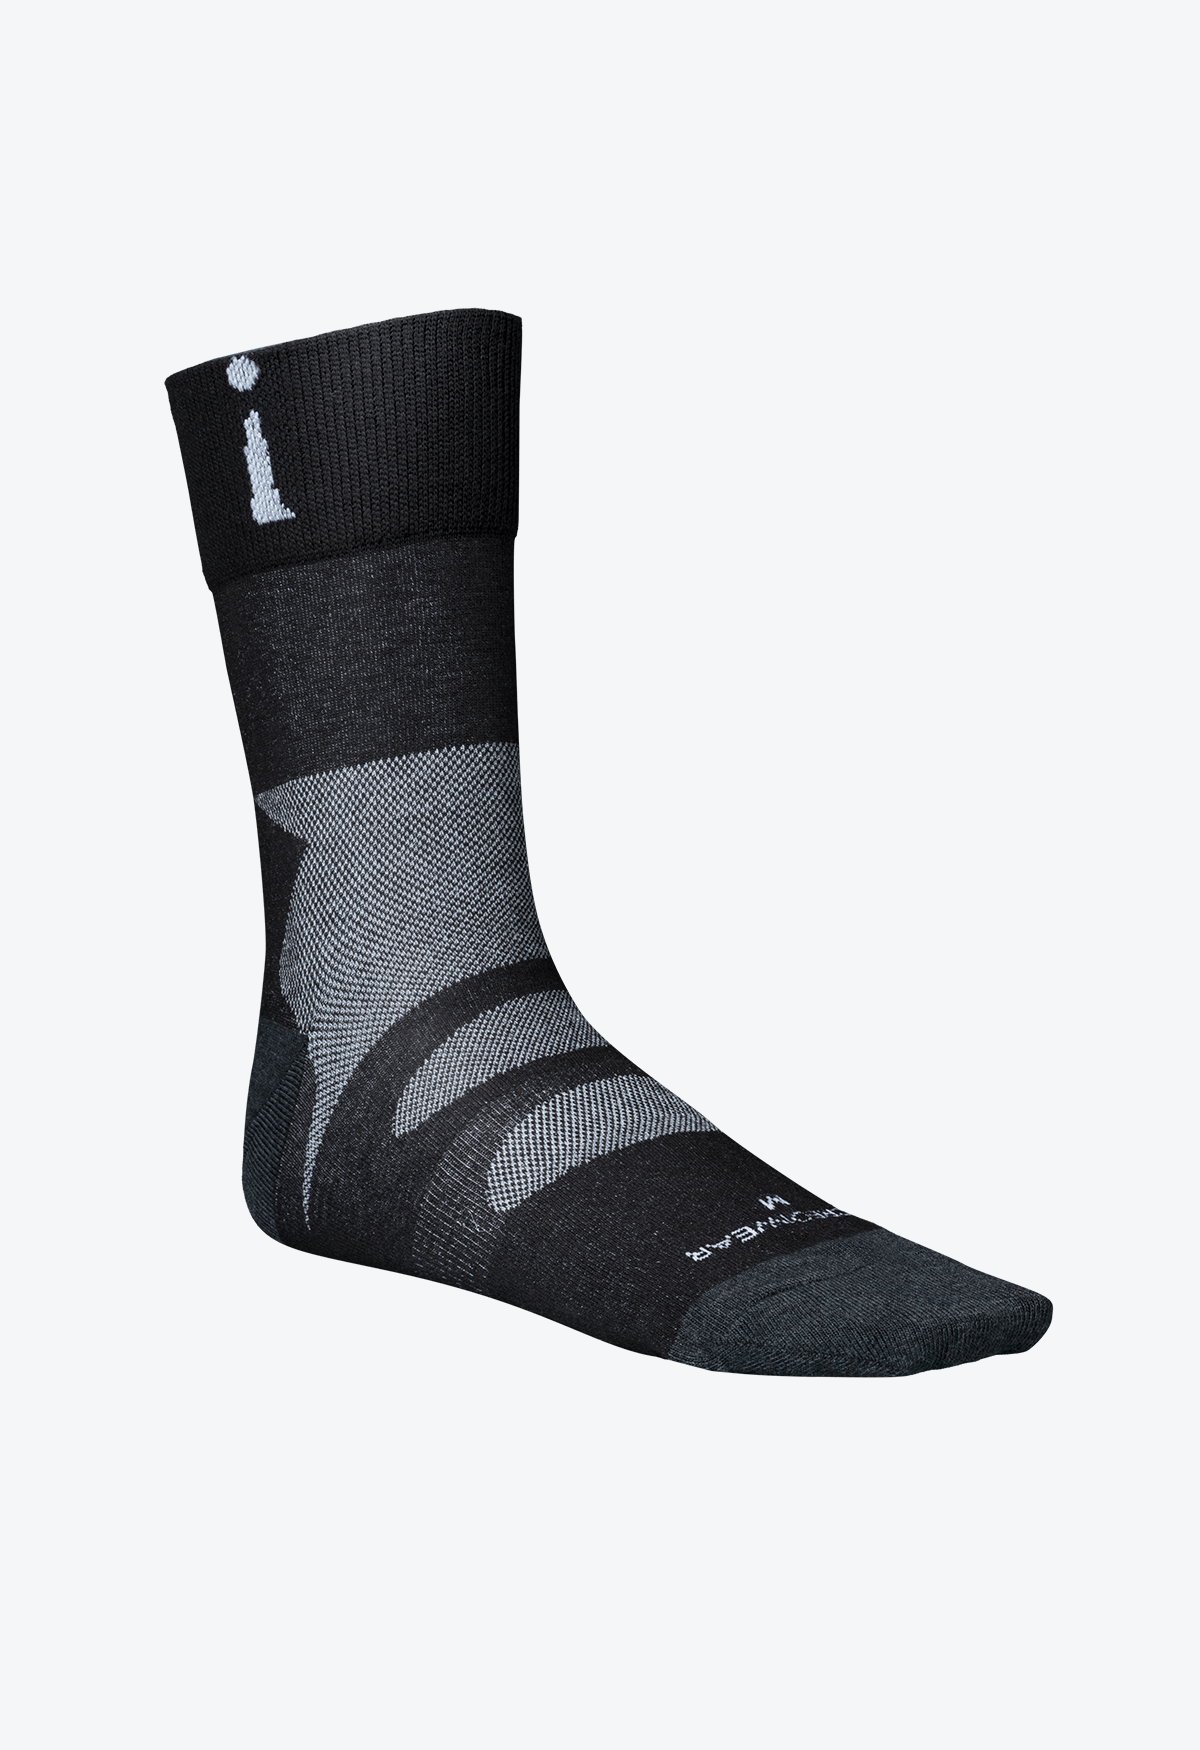 Thin Sports Socks for All Day Comfort | Incrediwear